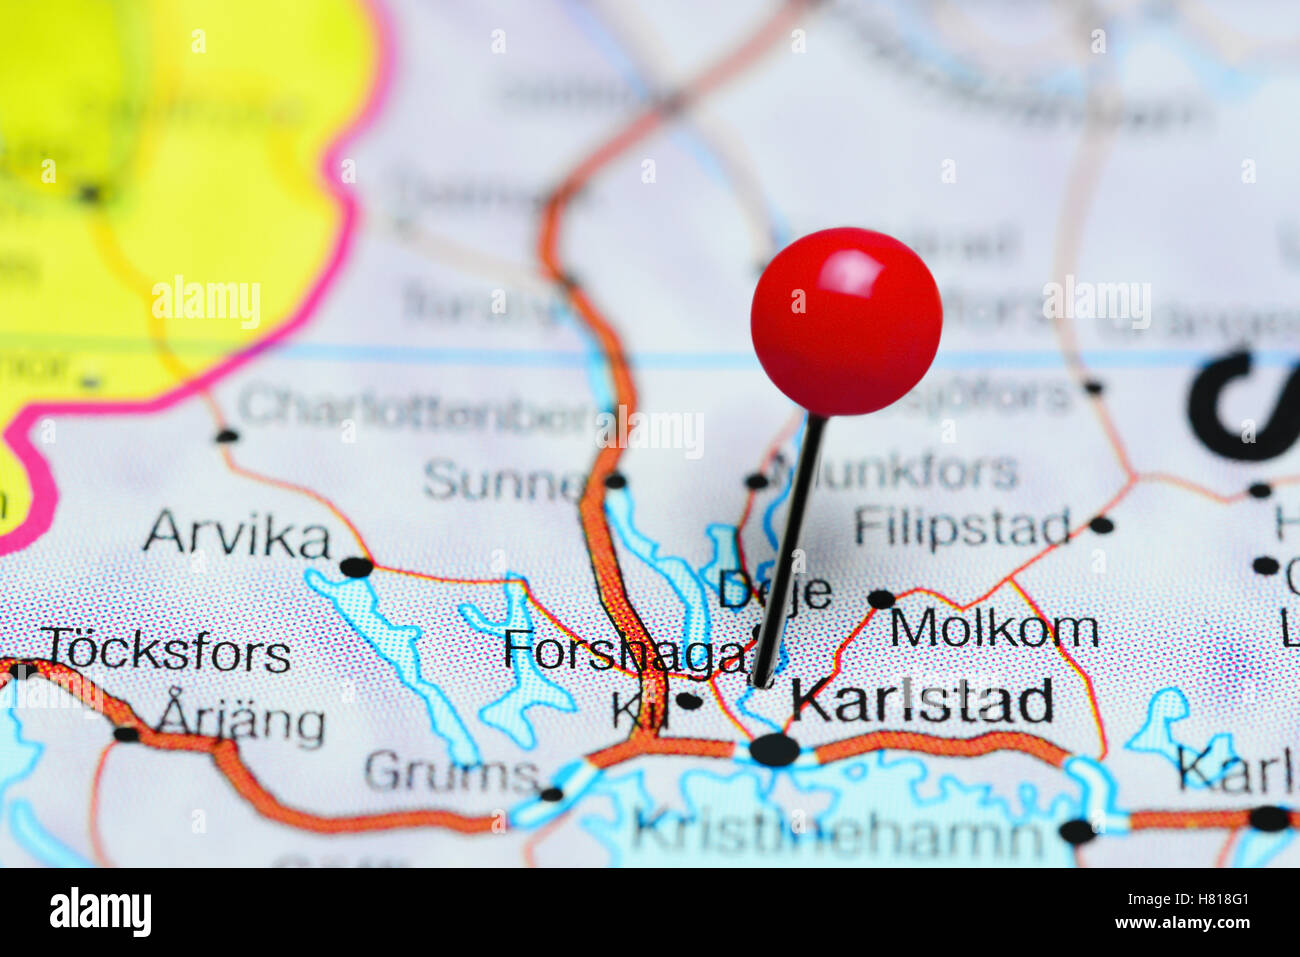 Forshaga pinned on a map of Sweden Stock Photo